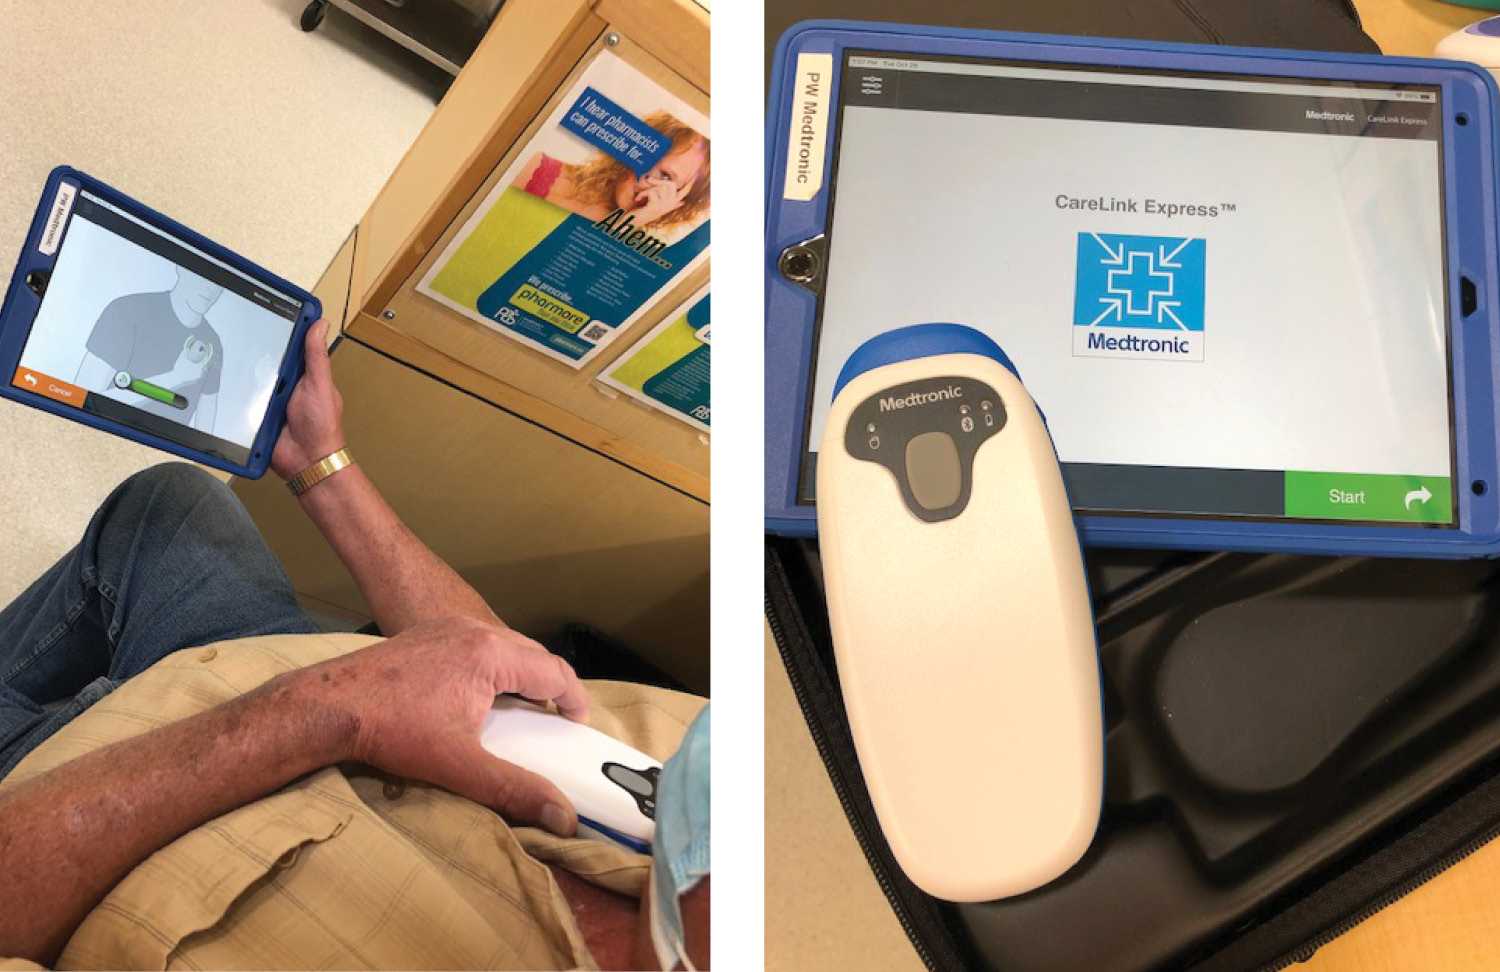 A patient having his cardiac device checked through CareLink Express at the Southeast Integrated Care Centre in Moosomin. Until this year, patients had to travel to Regina to have their devices checked.